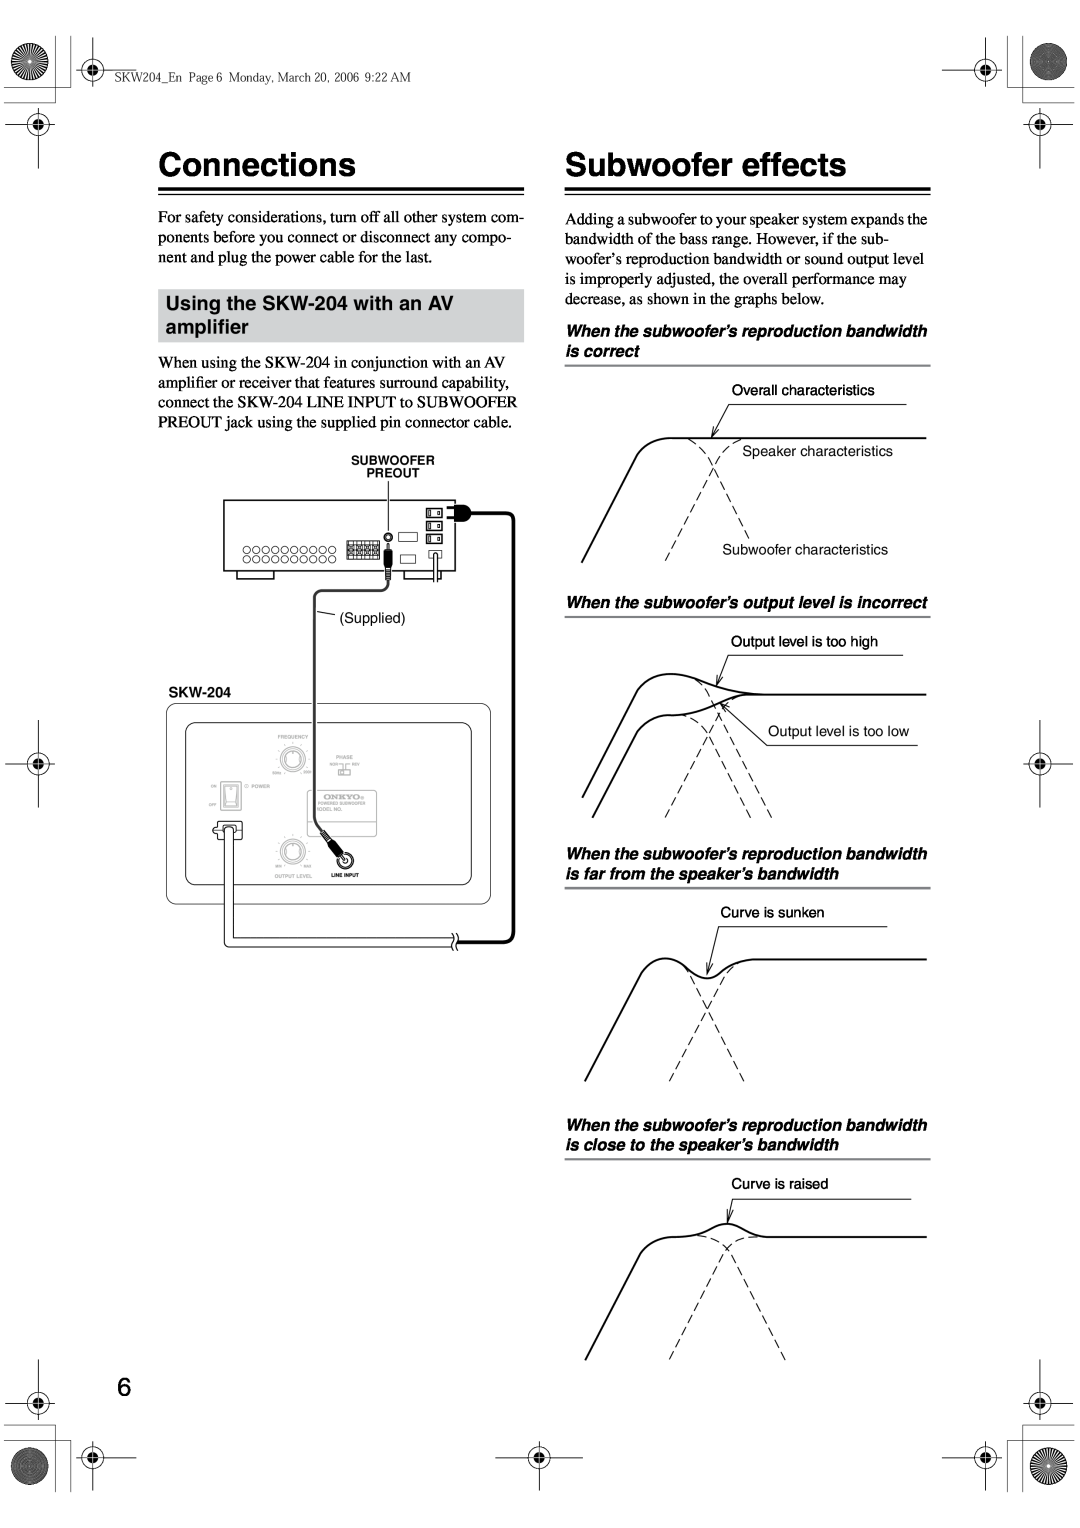 Onkyo instruction manual Connections, Subwoofer effects, Using the SKW-204with an AV ampliﬁer 